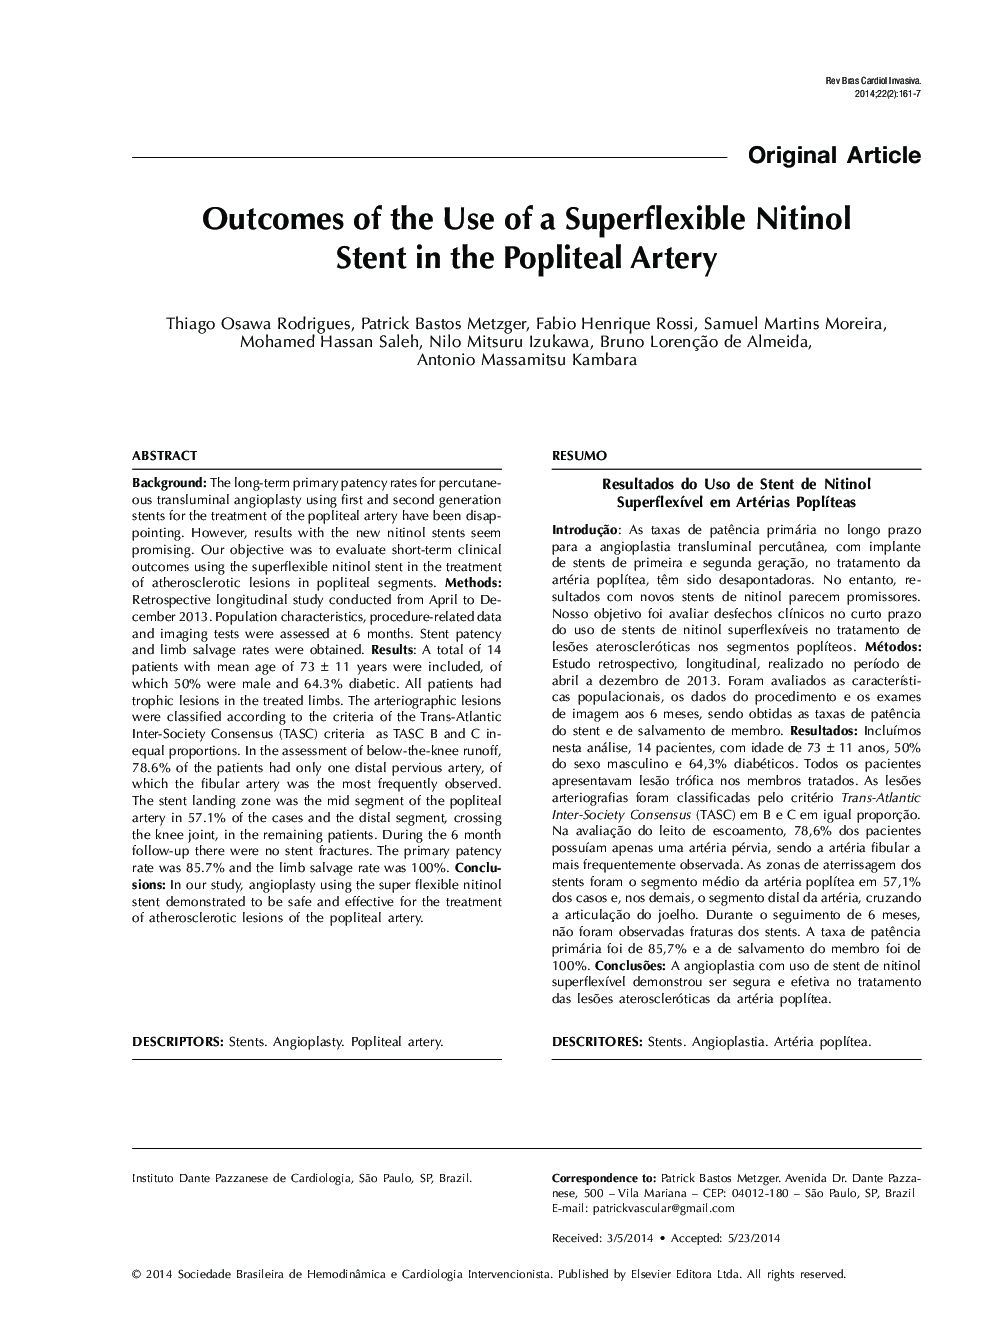 Outcomes of the Use of a Superflexible Nitinol Stent in the Popliteal Artery